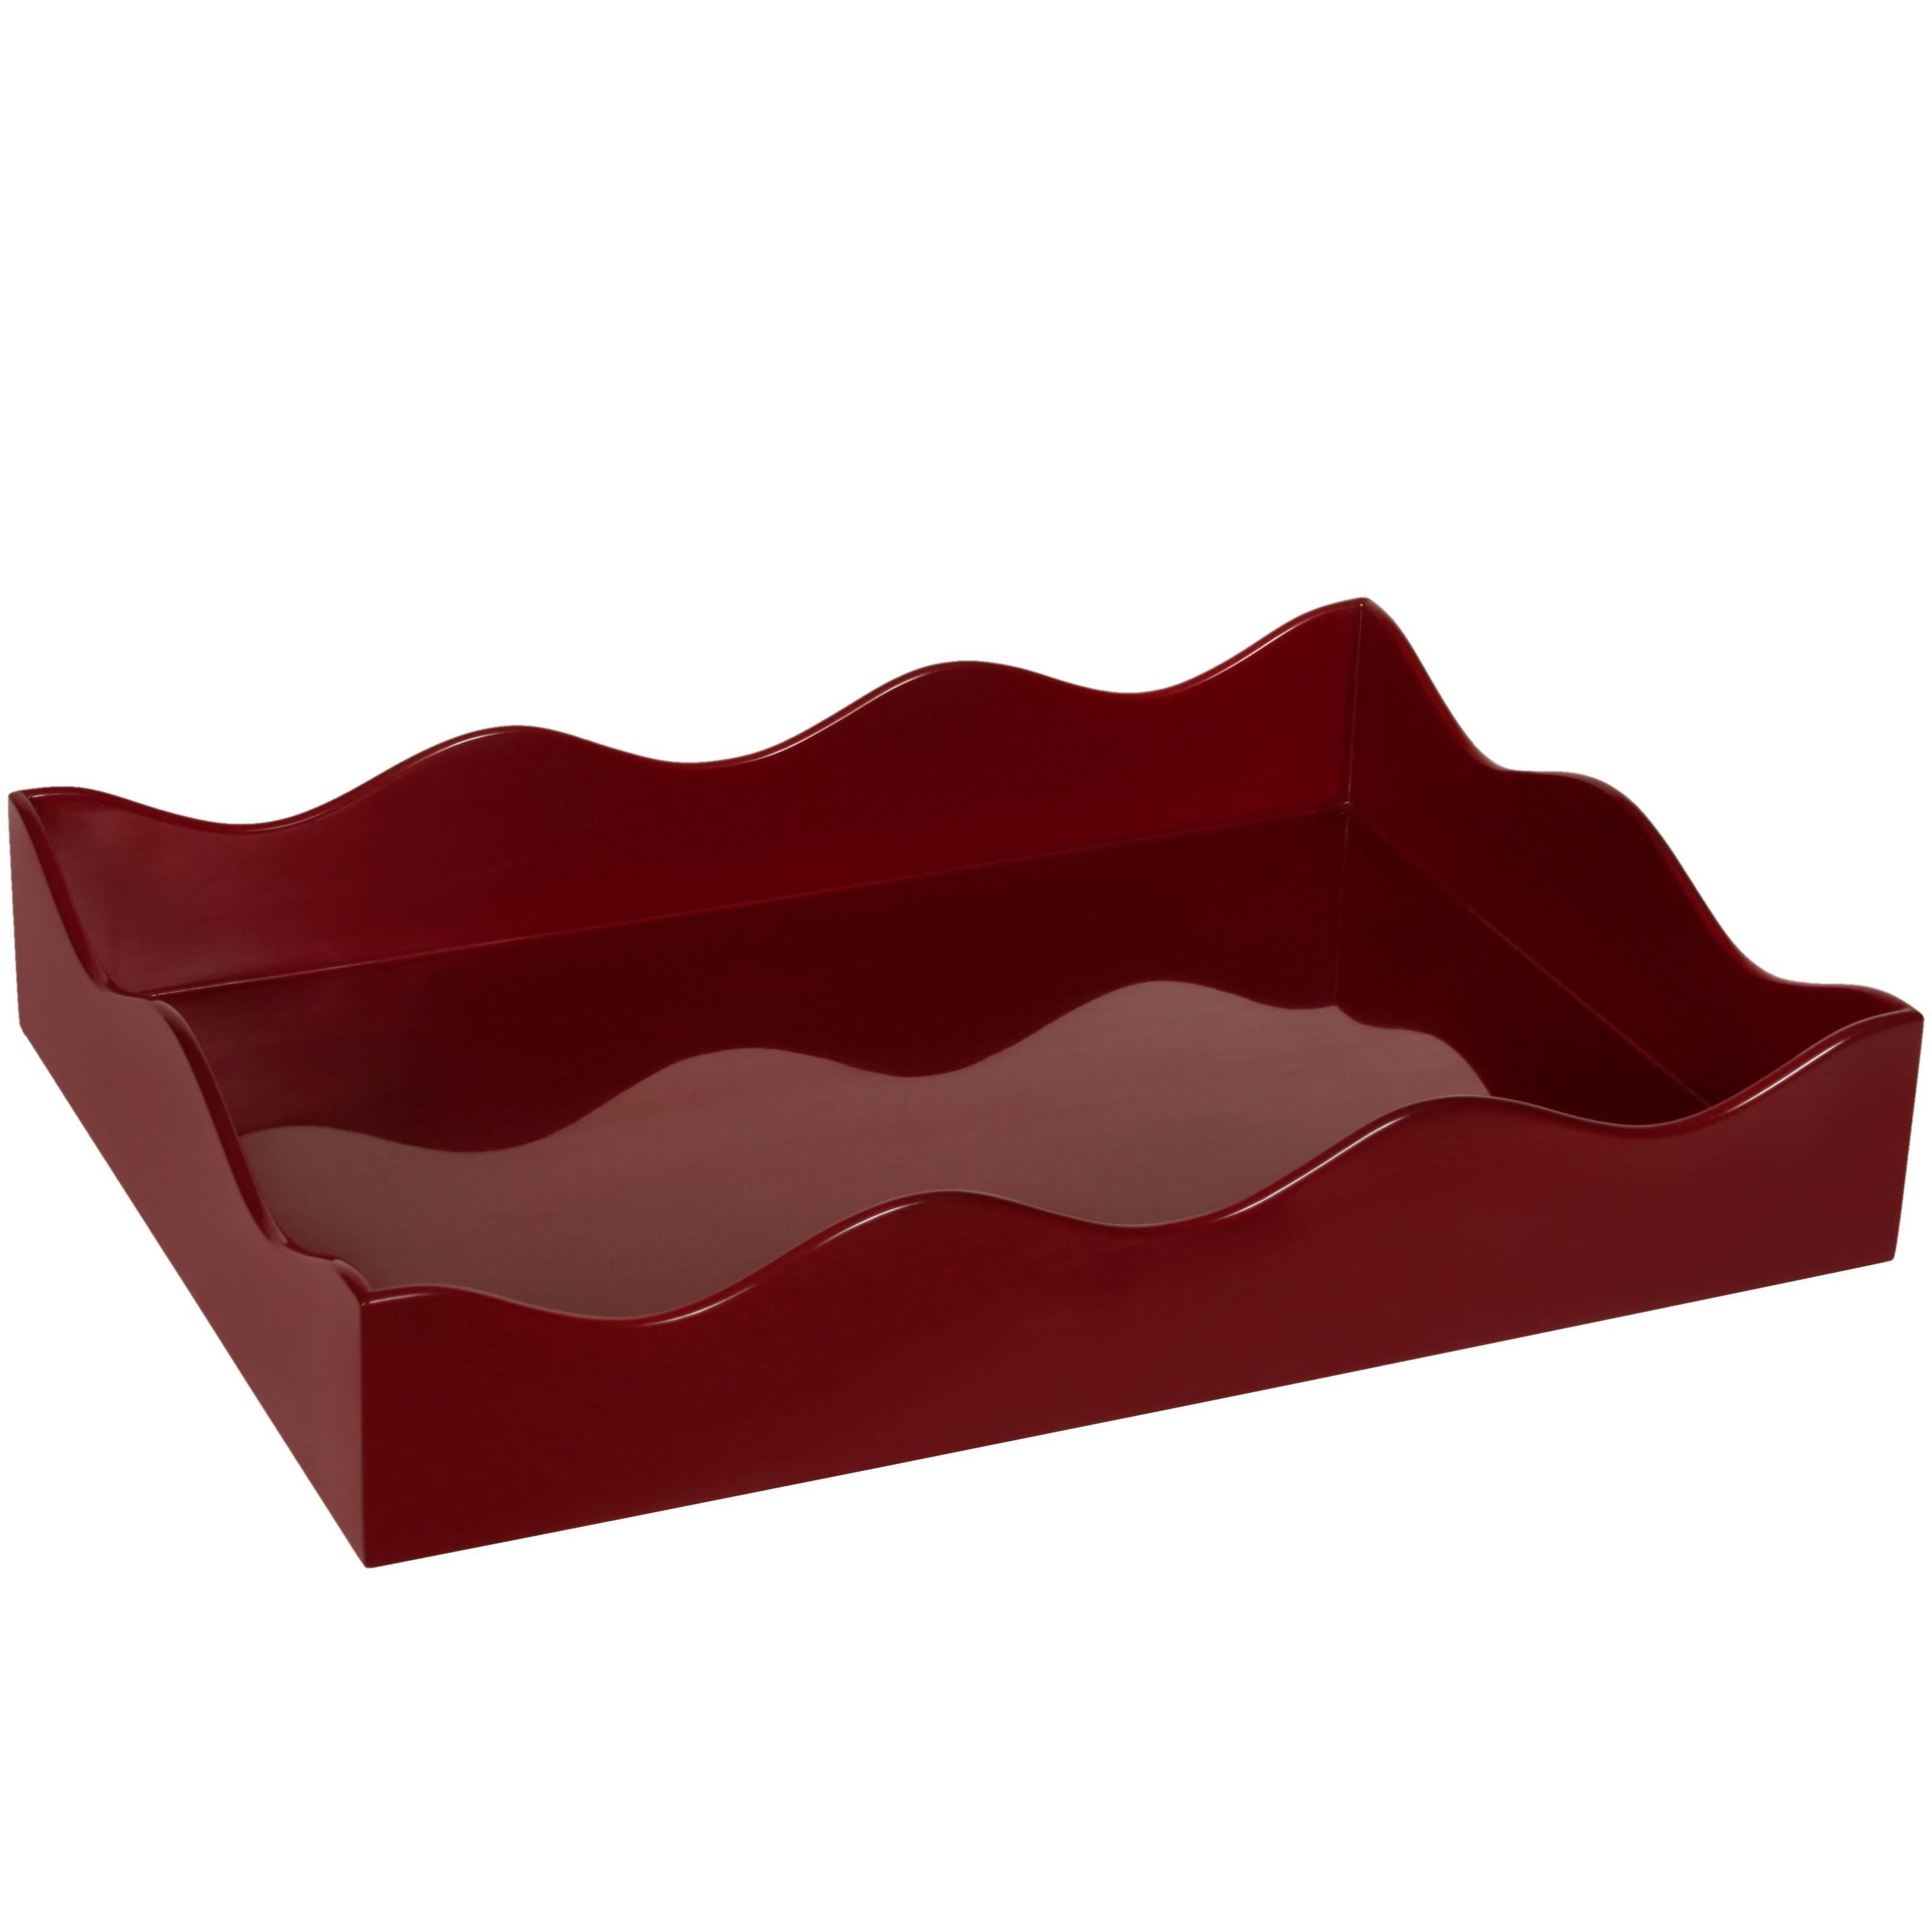 Large "Wavy" Tray in Bordeaux Lacquer